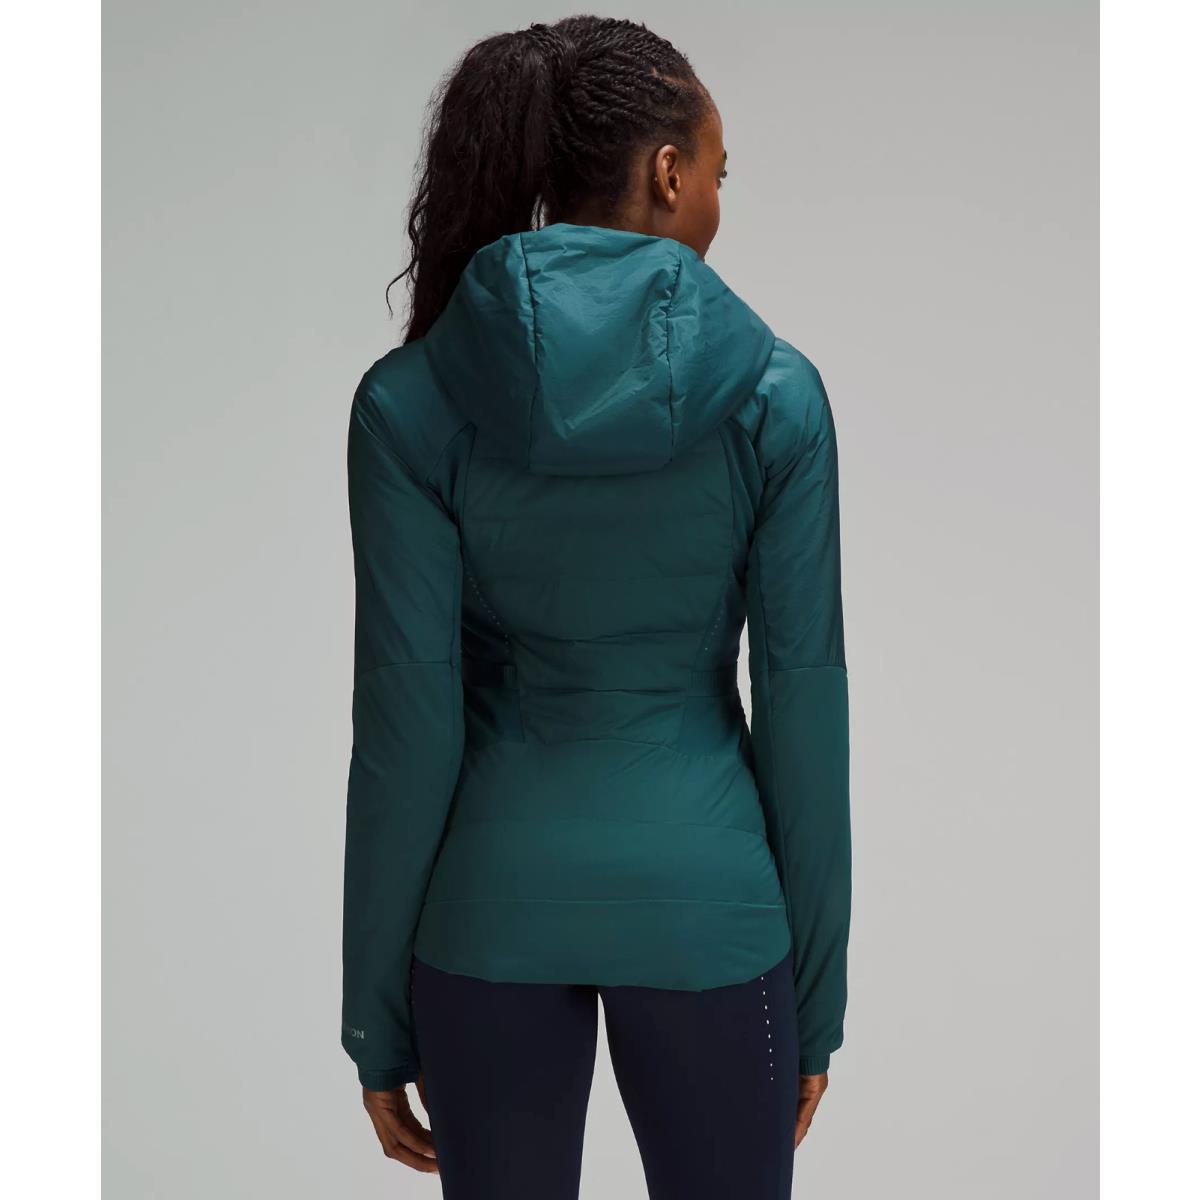 Lululemon Womens Storm Teal Down For It All Jacket Running 700 Fill Size 8